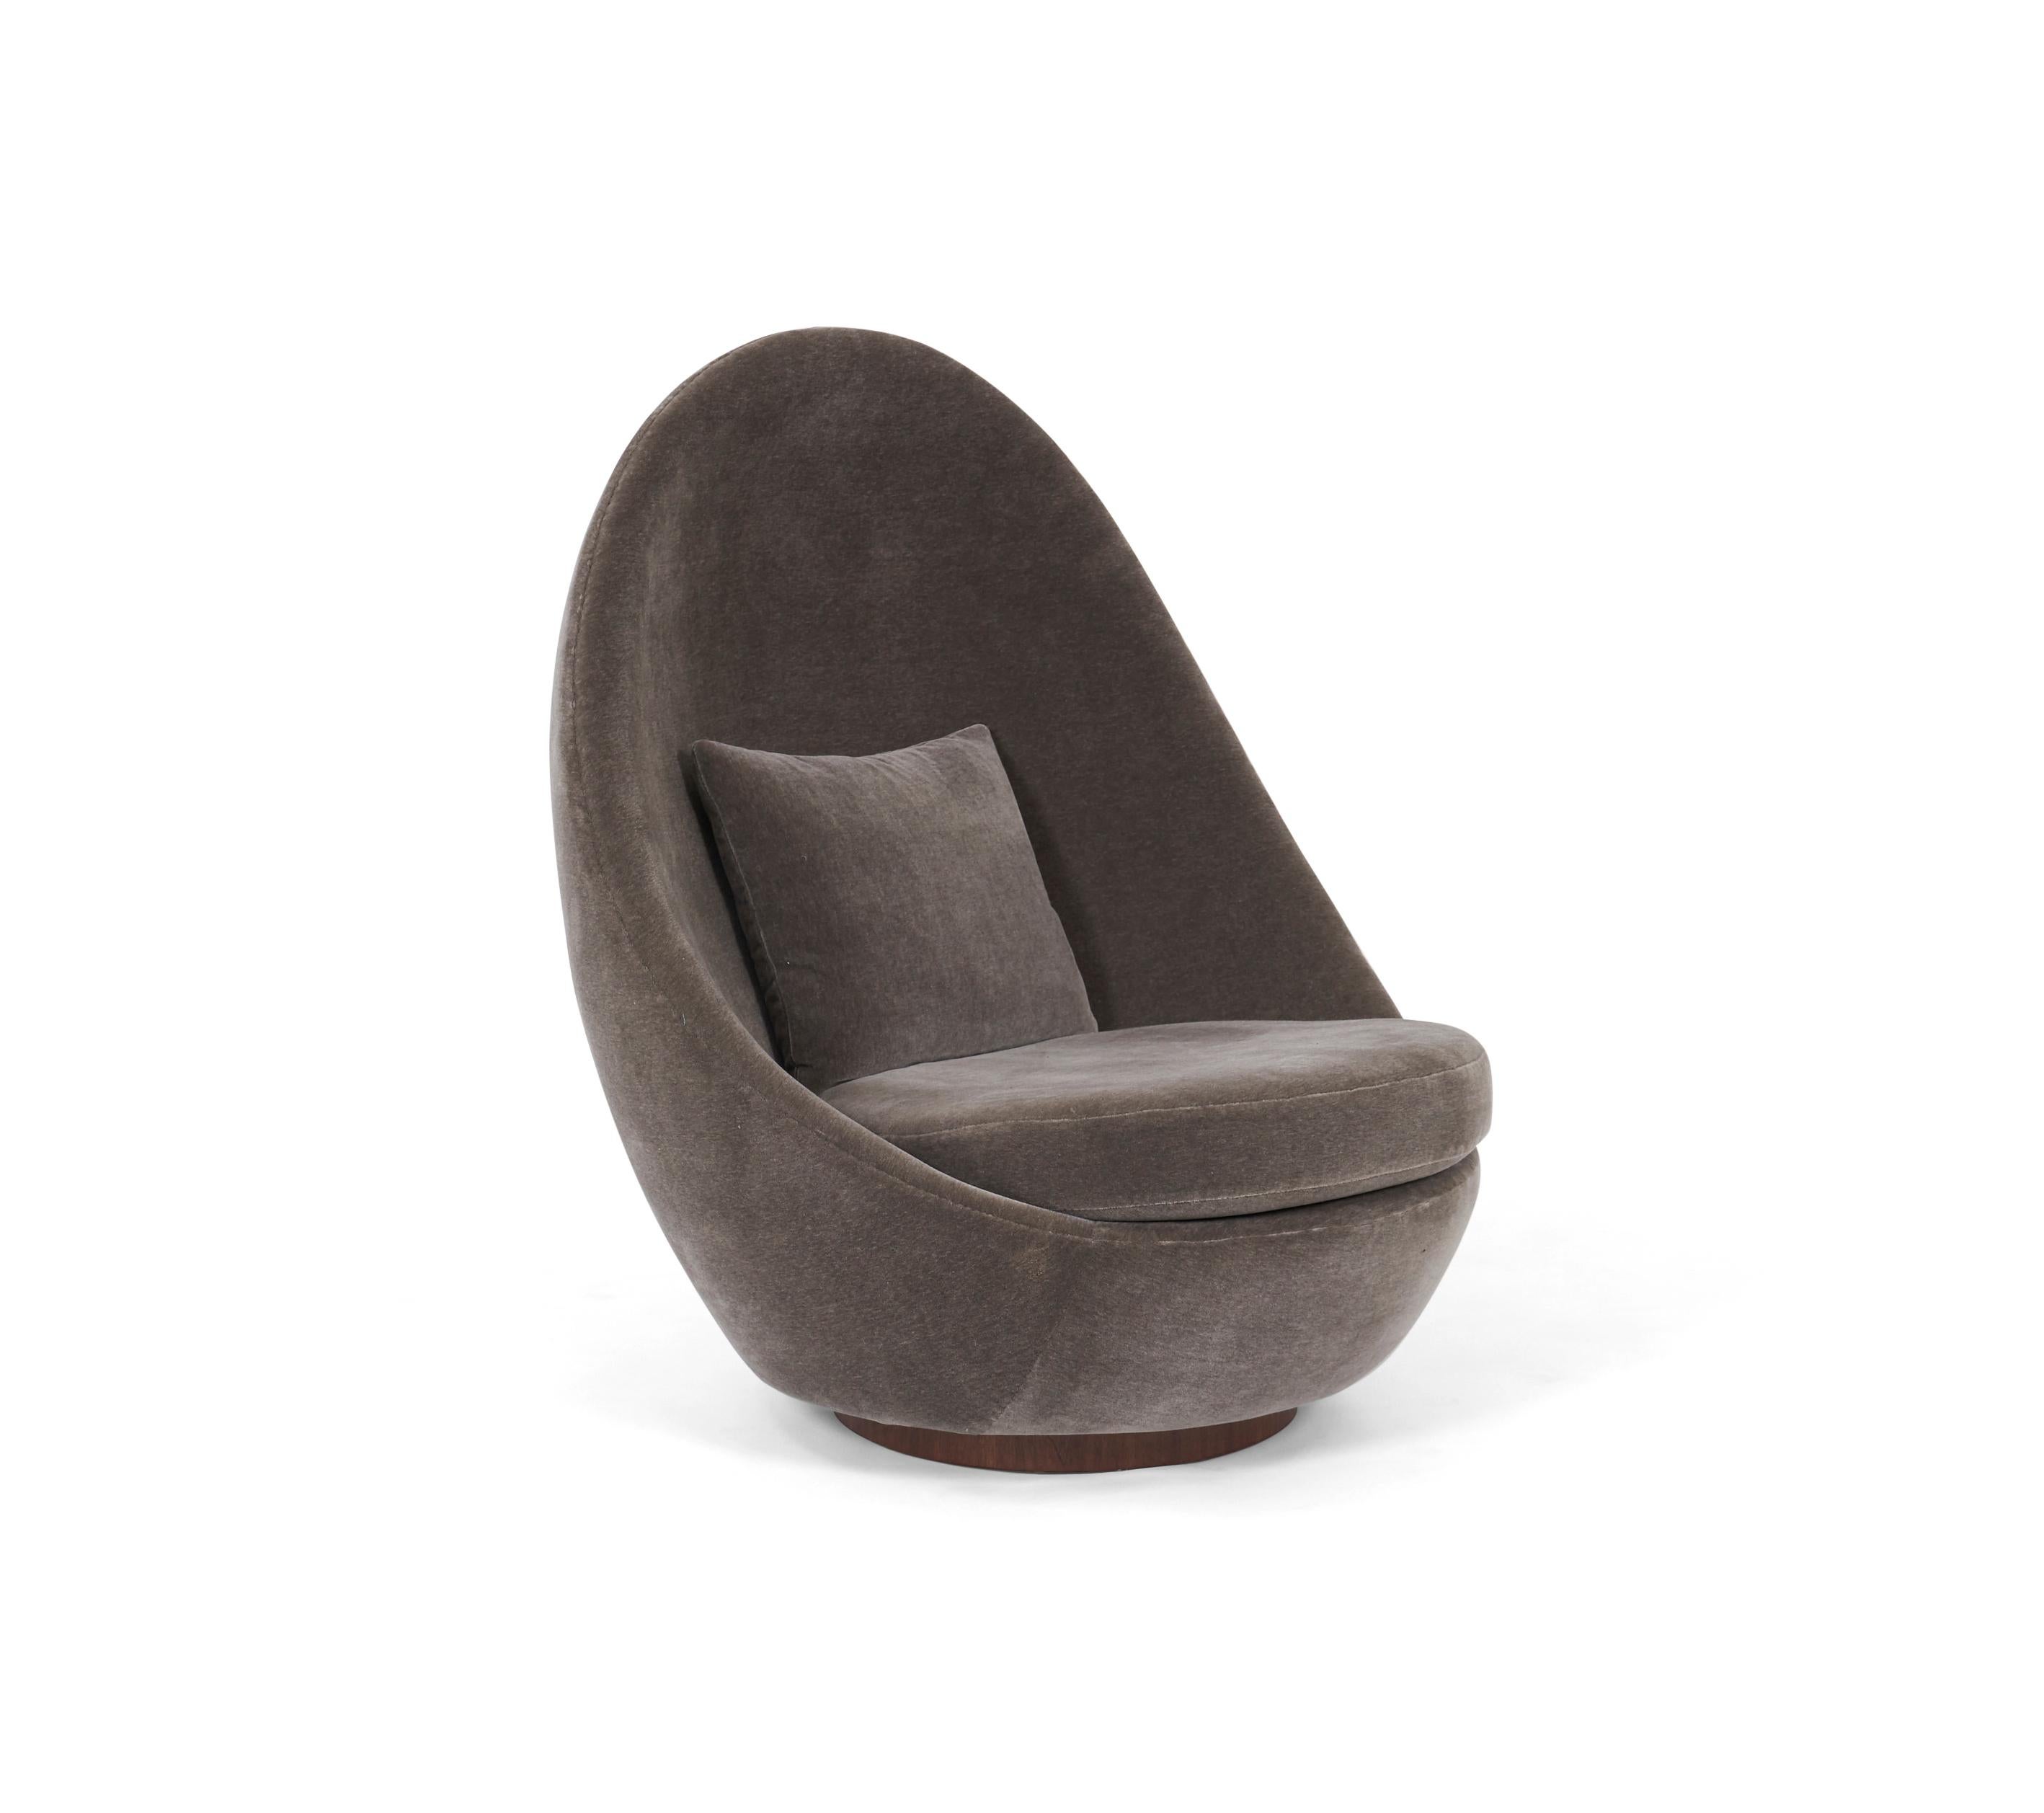 Fully restored high back egg chair by Milo Baughman. Vintage 1967. All new foam and grey mohair over walnut base.